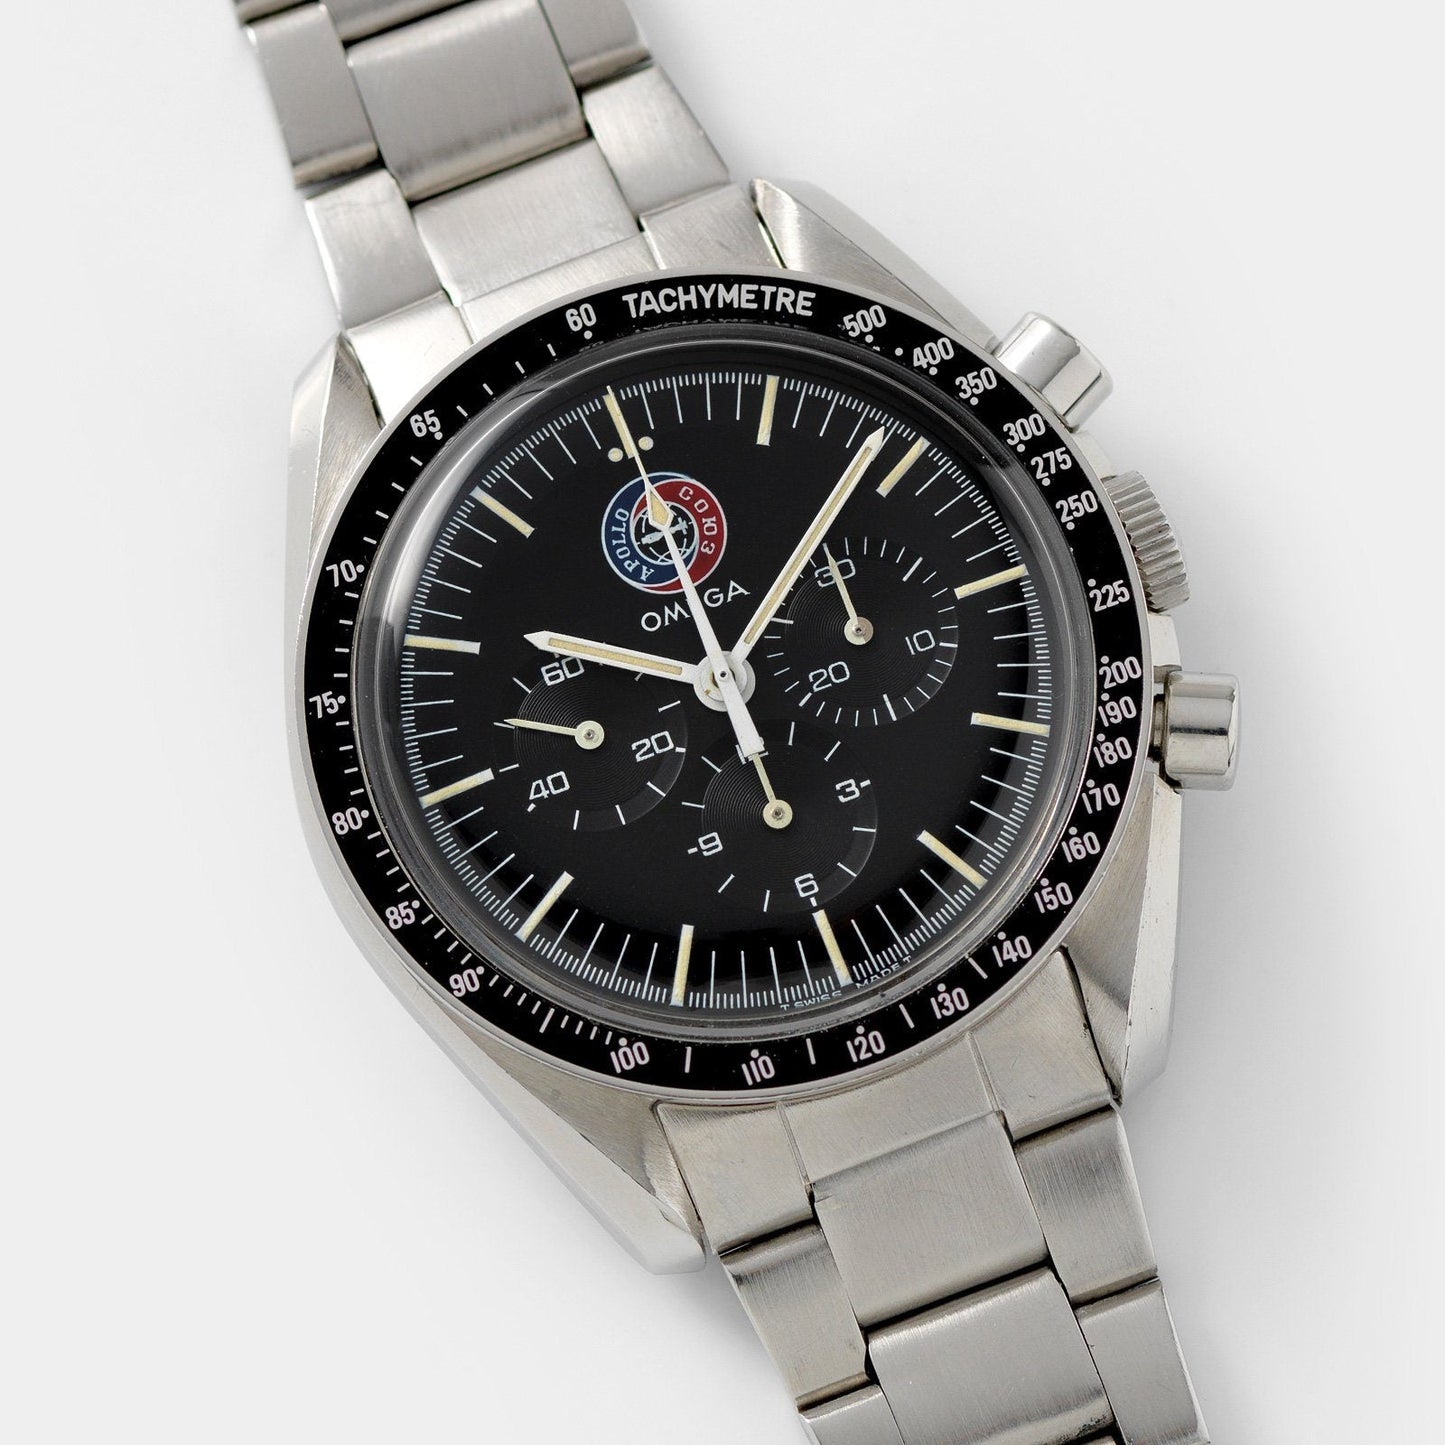 Omega Speedmaster Soyuz 145.022 with Archive Extract Number 111 out of 500